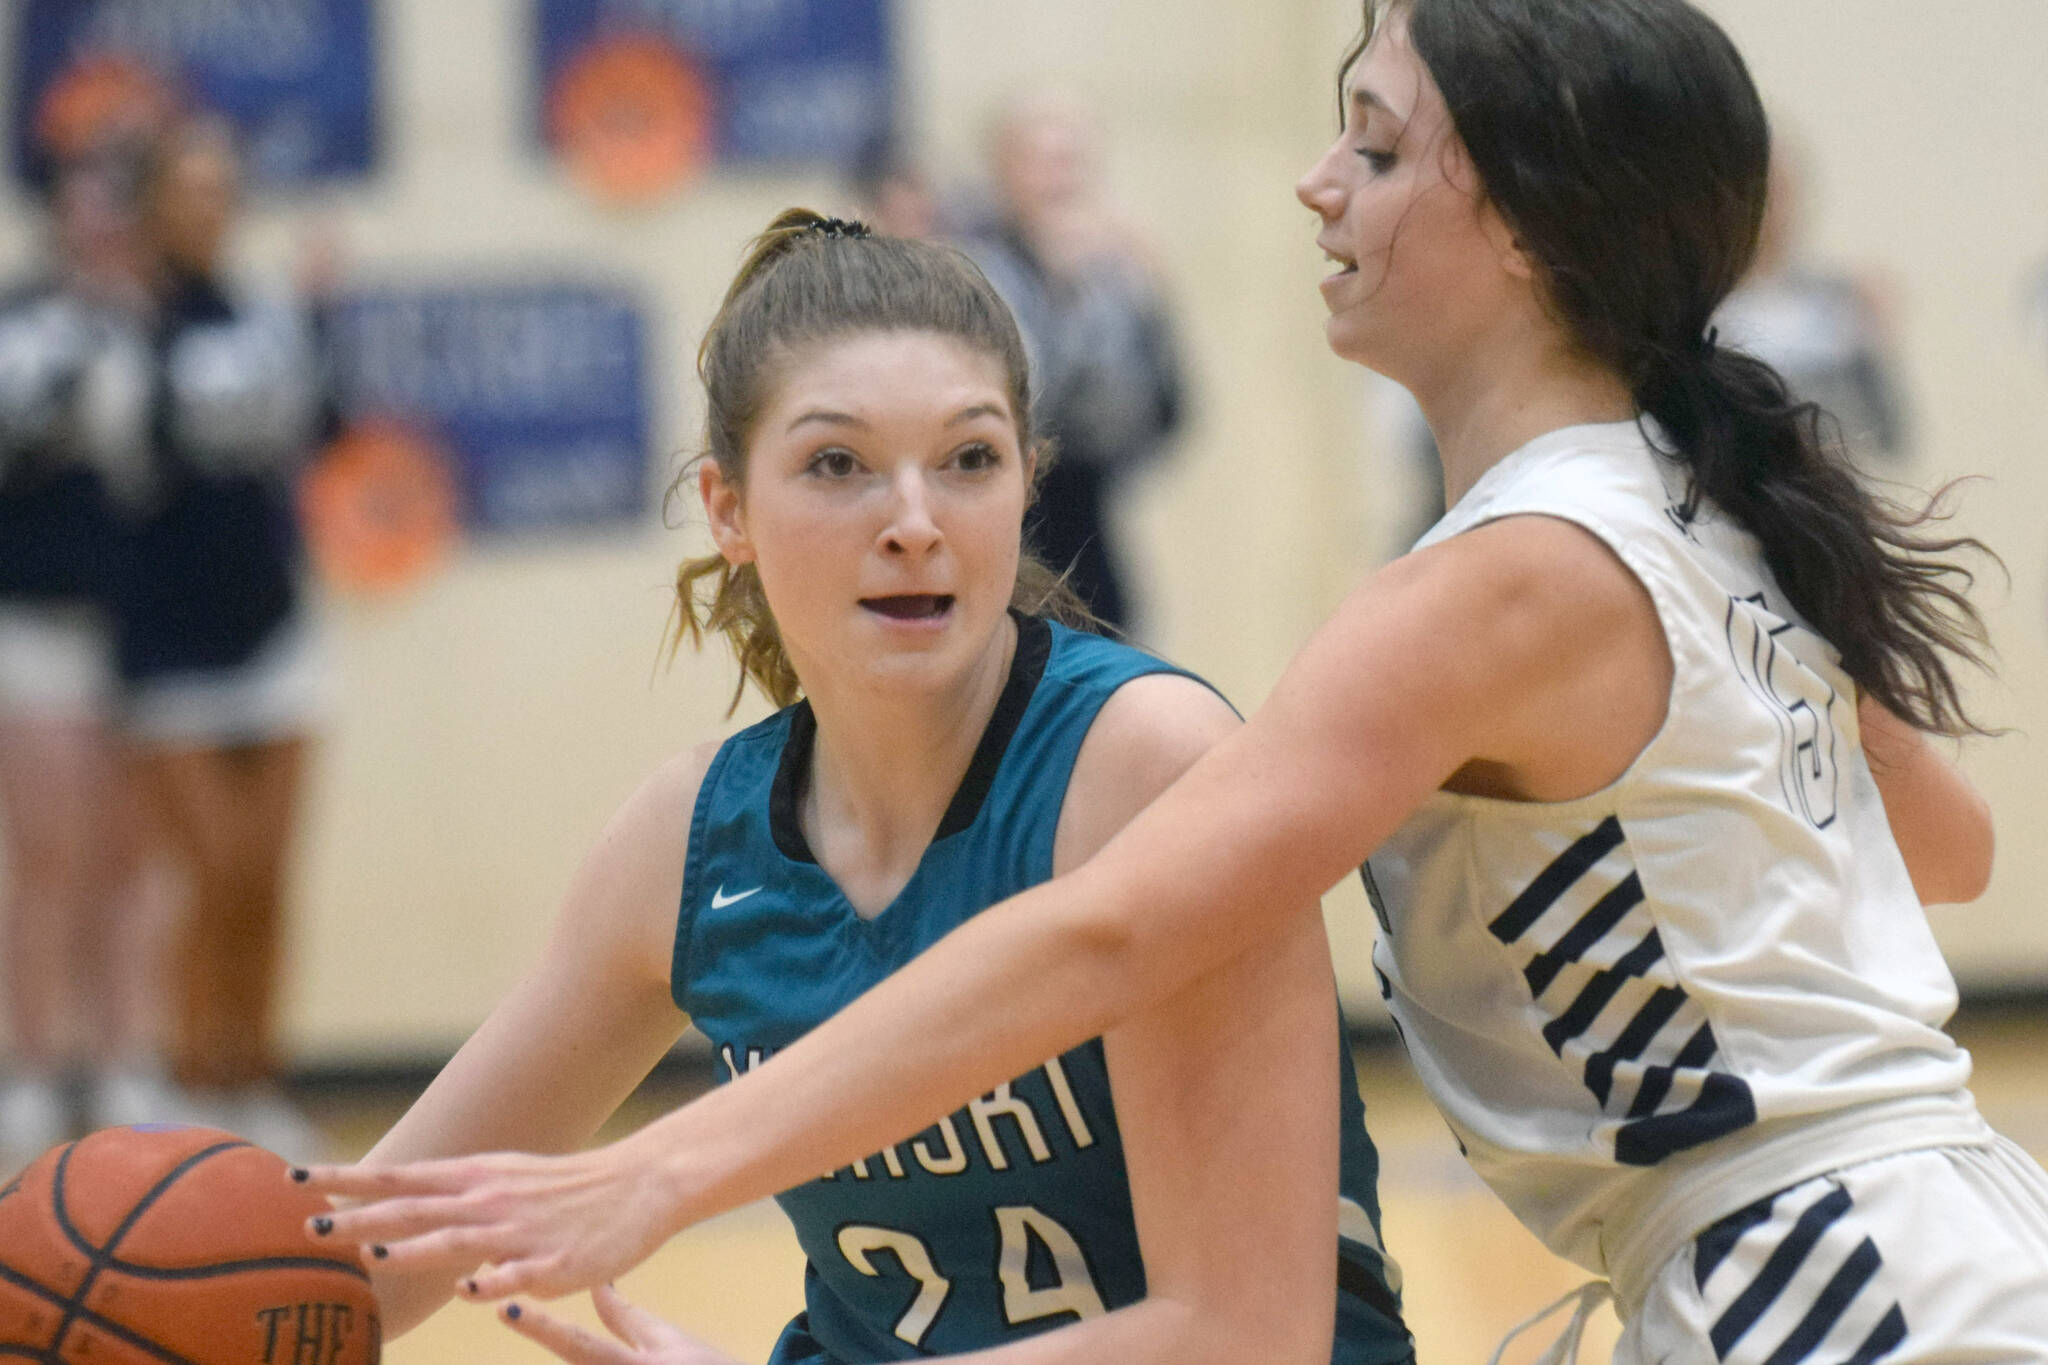 Nikiski's Ashlynne Playle keeps the ball from Soldotna's Adarra Hagelund on Tuesday, Feb. 8, 2022, at Soldotna High School in Soldotna, Alaska. (Photo by Camille Botello/Peninsula Clarion)